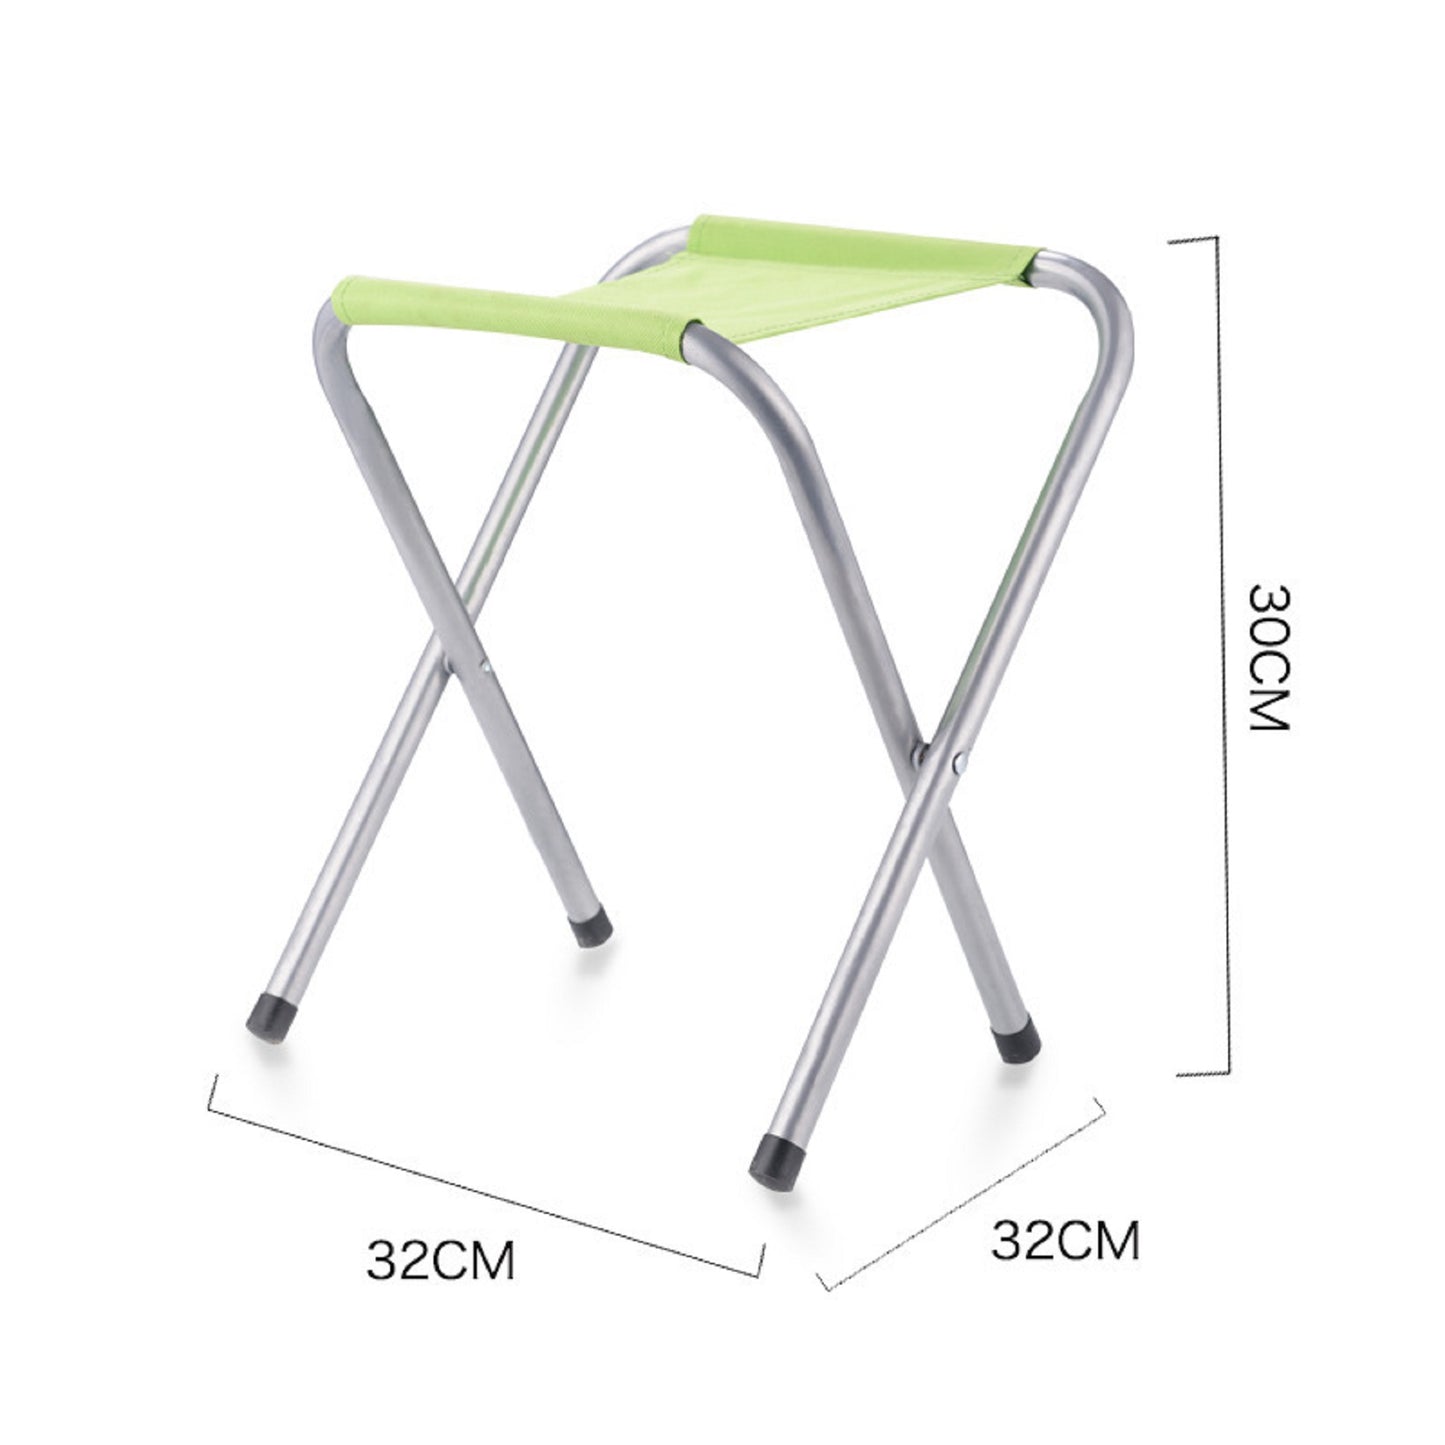 Folding table+4 chairs